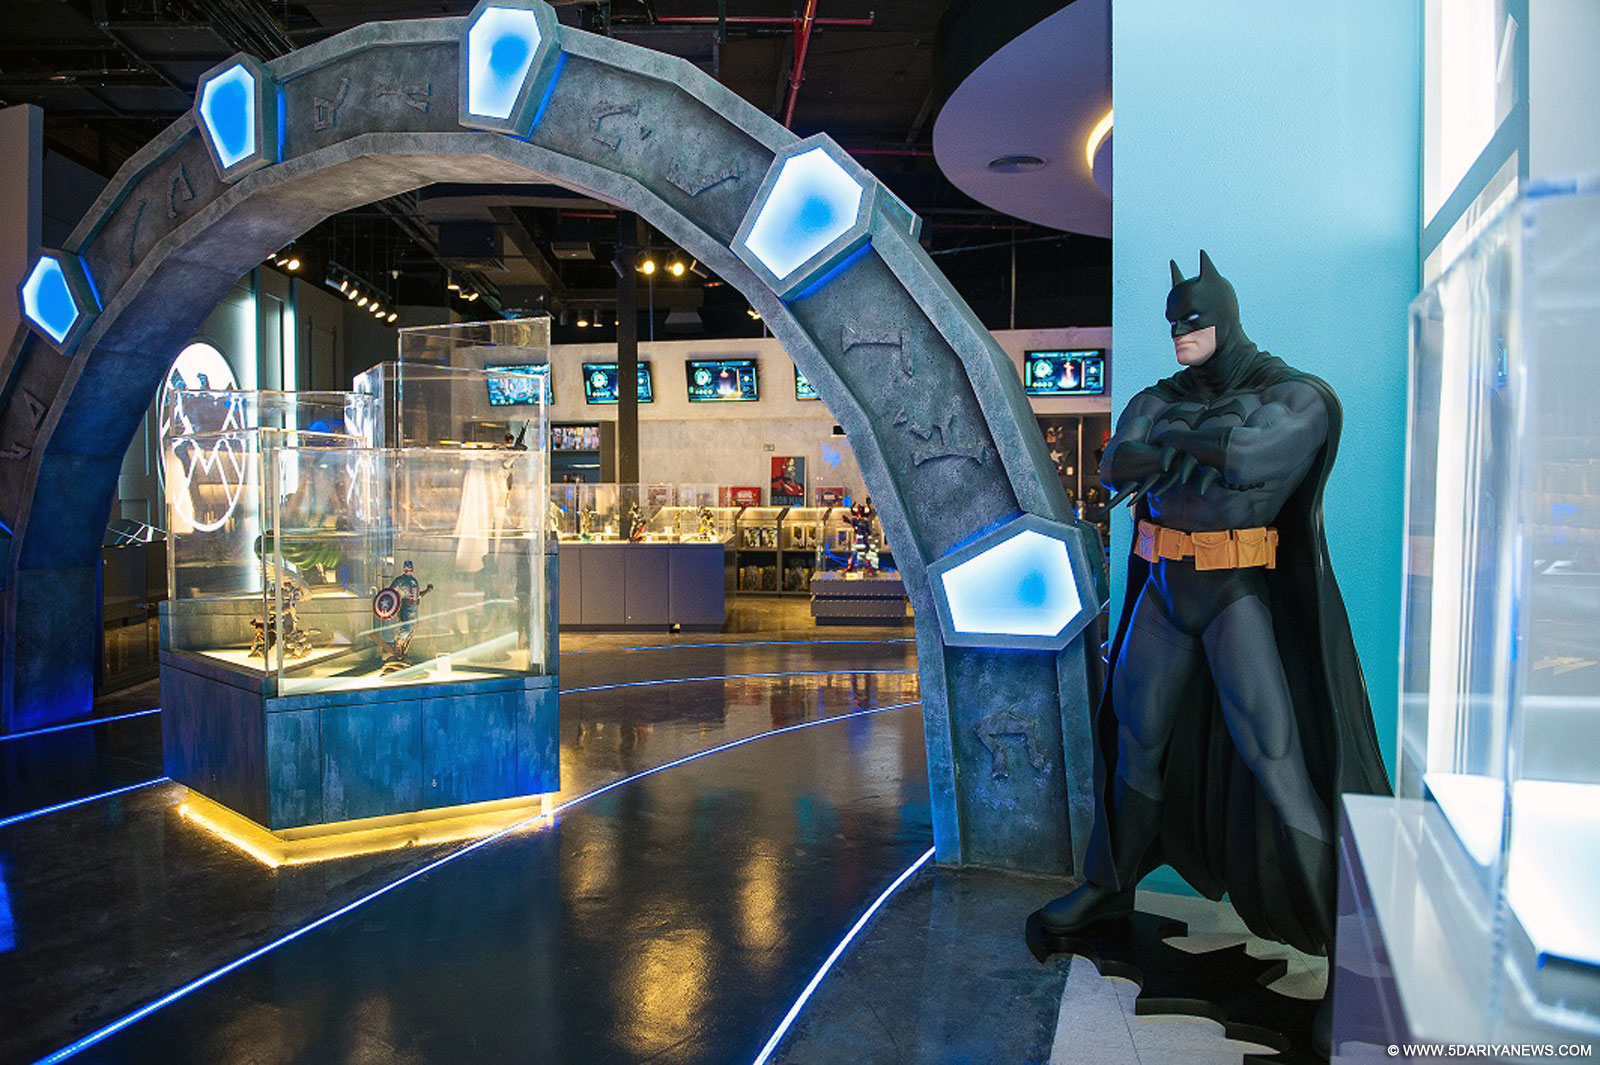 Batman, Avengers and Hello Kitty to star in Comic Pavilion at SIBF 2015